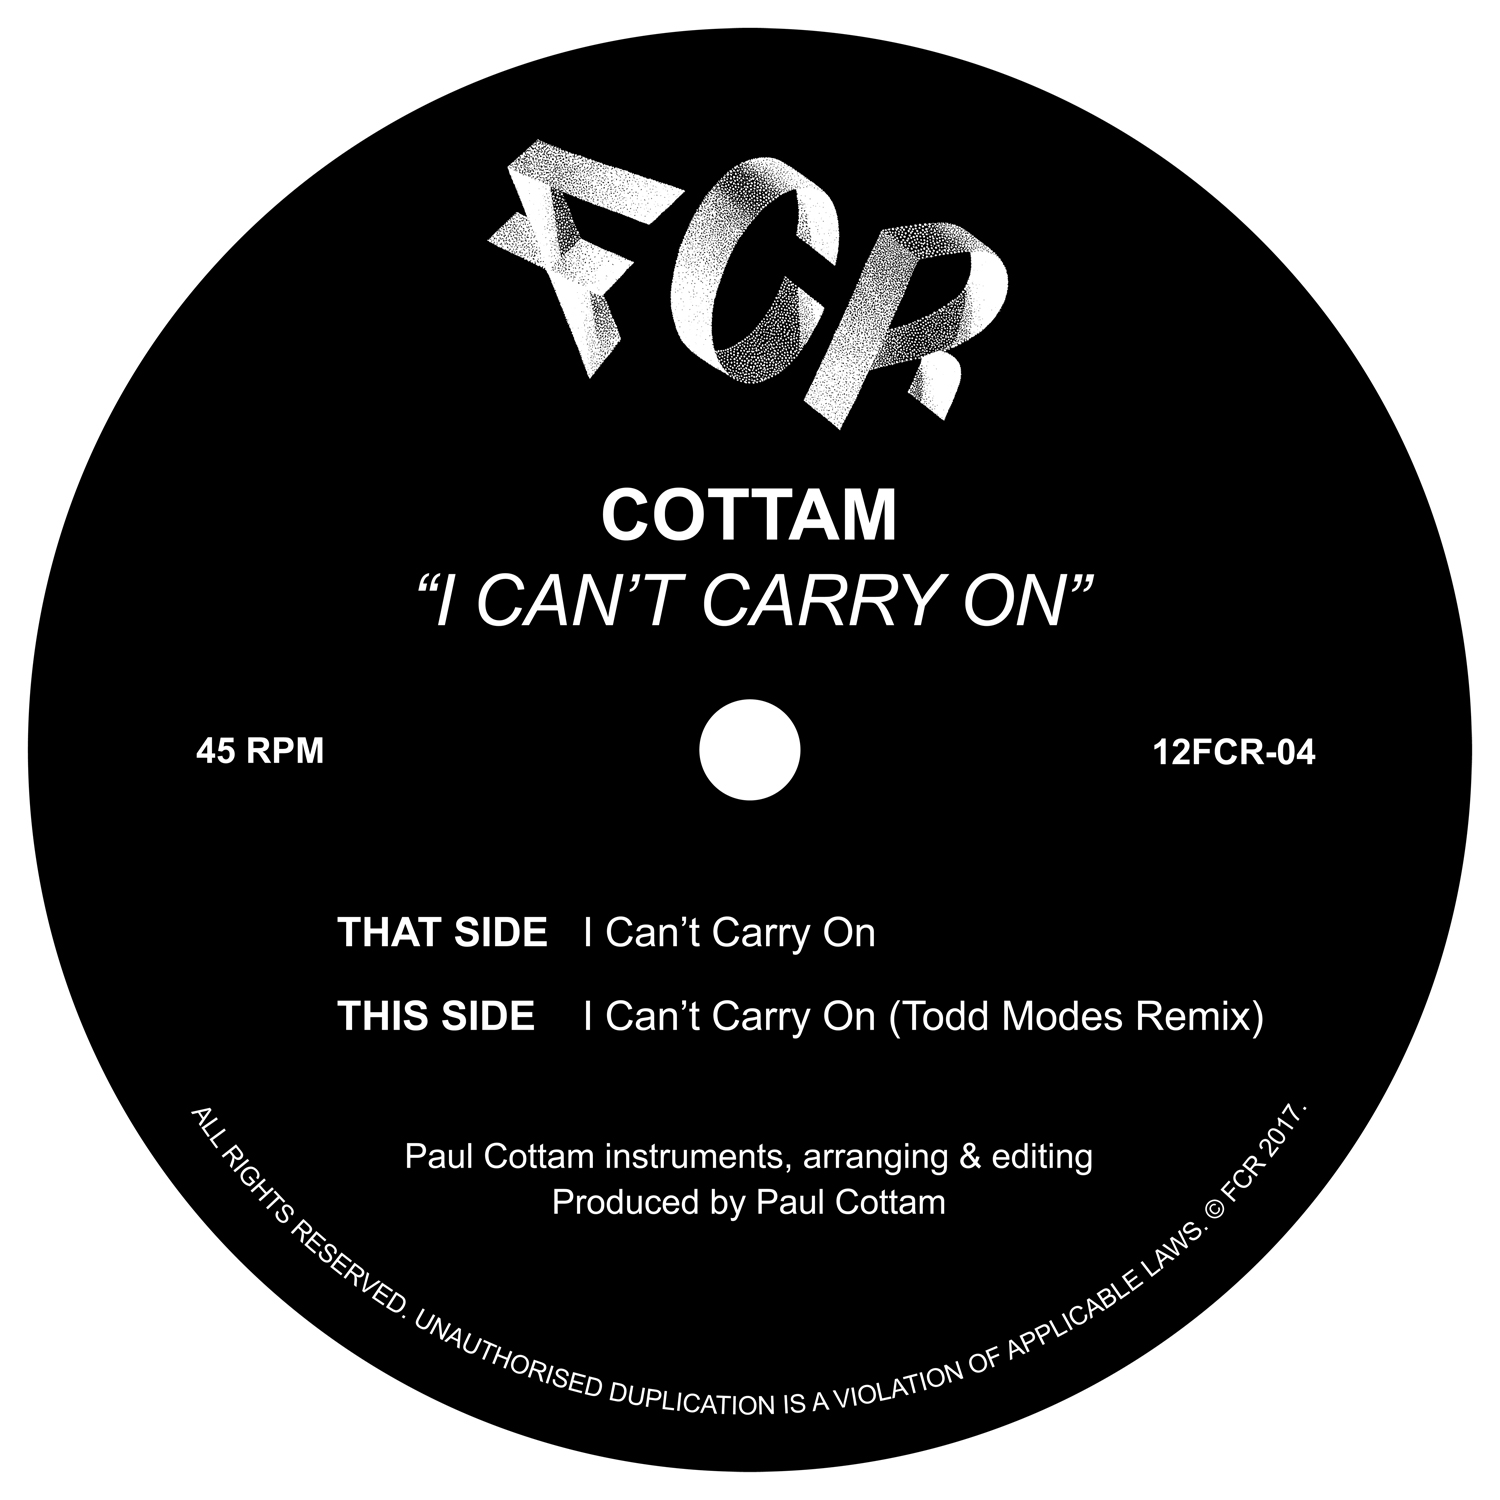 Cottam/I CAN'T CARRY ON 12